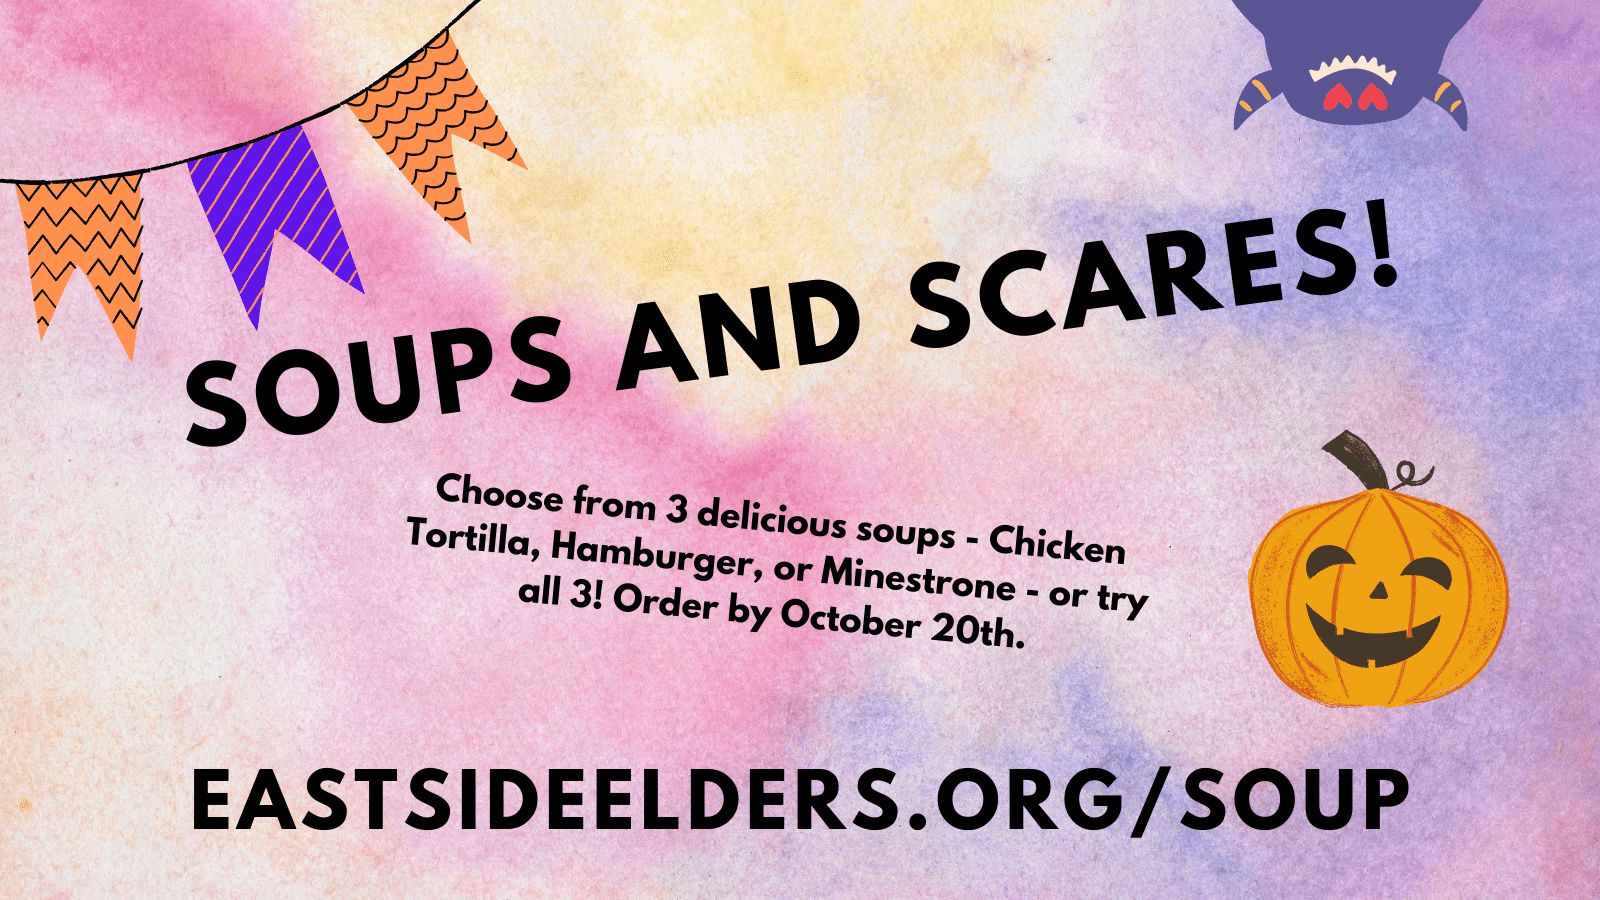 Image promoting the Soups and Scares fundraiser. Pumpkin, bunting, and a purple monster on a colorful background. Text reads: Soup and Scares! Choose from 3 delicious soups - Chicken tortilla, hamburger, or minestrone - or try all 3! Order by October 20th. EastSideElders.org/Soup